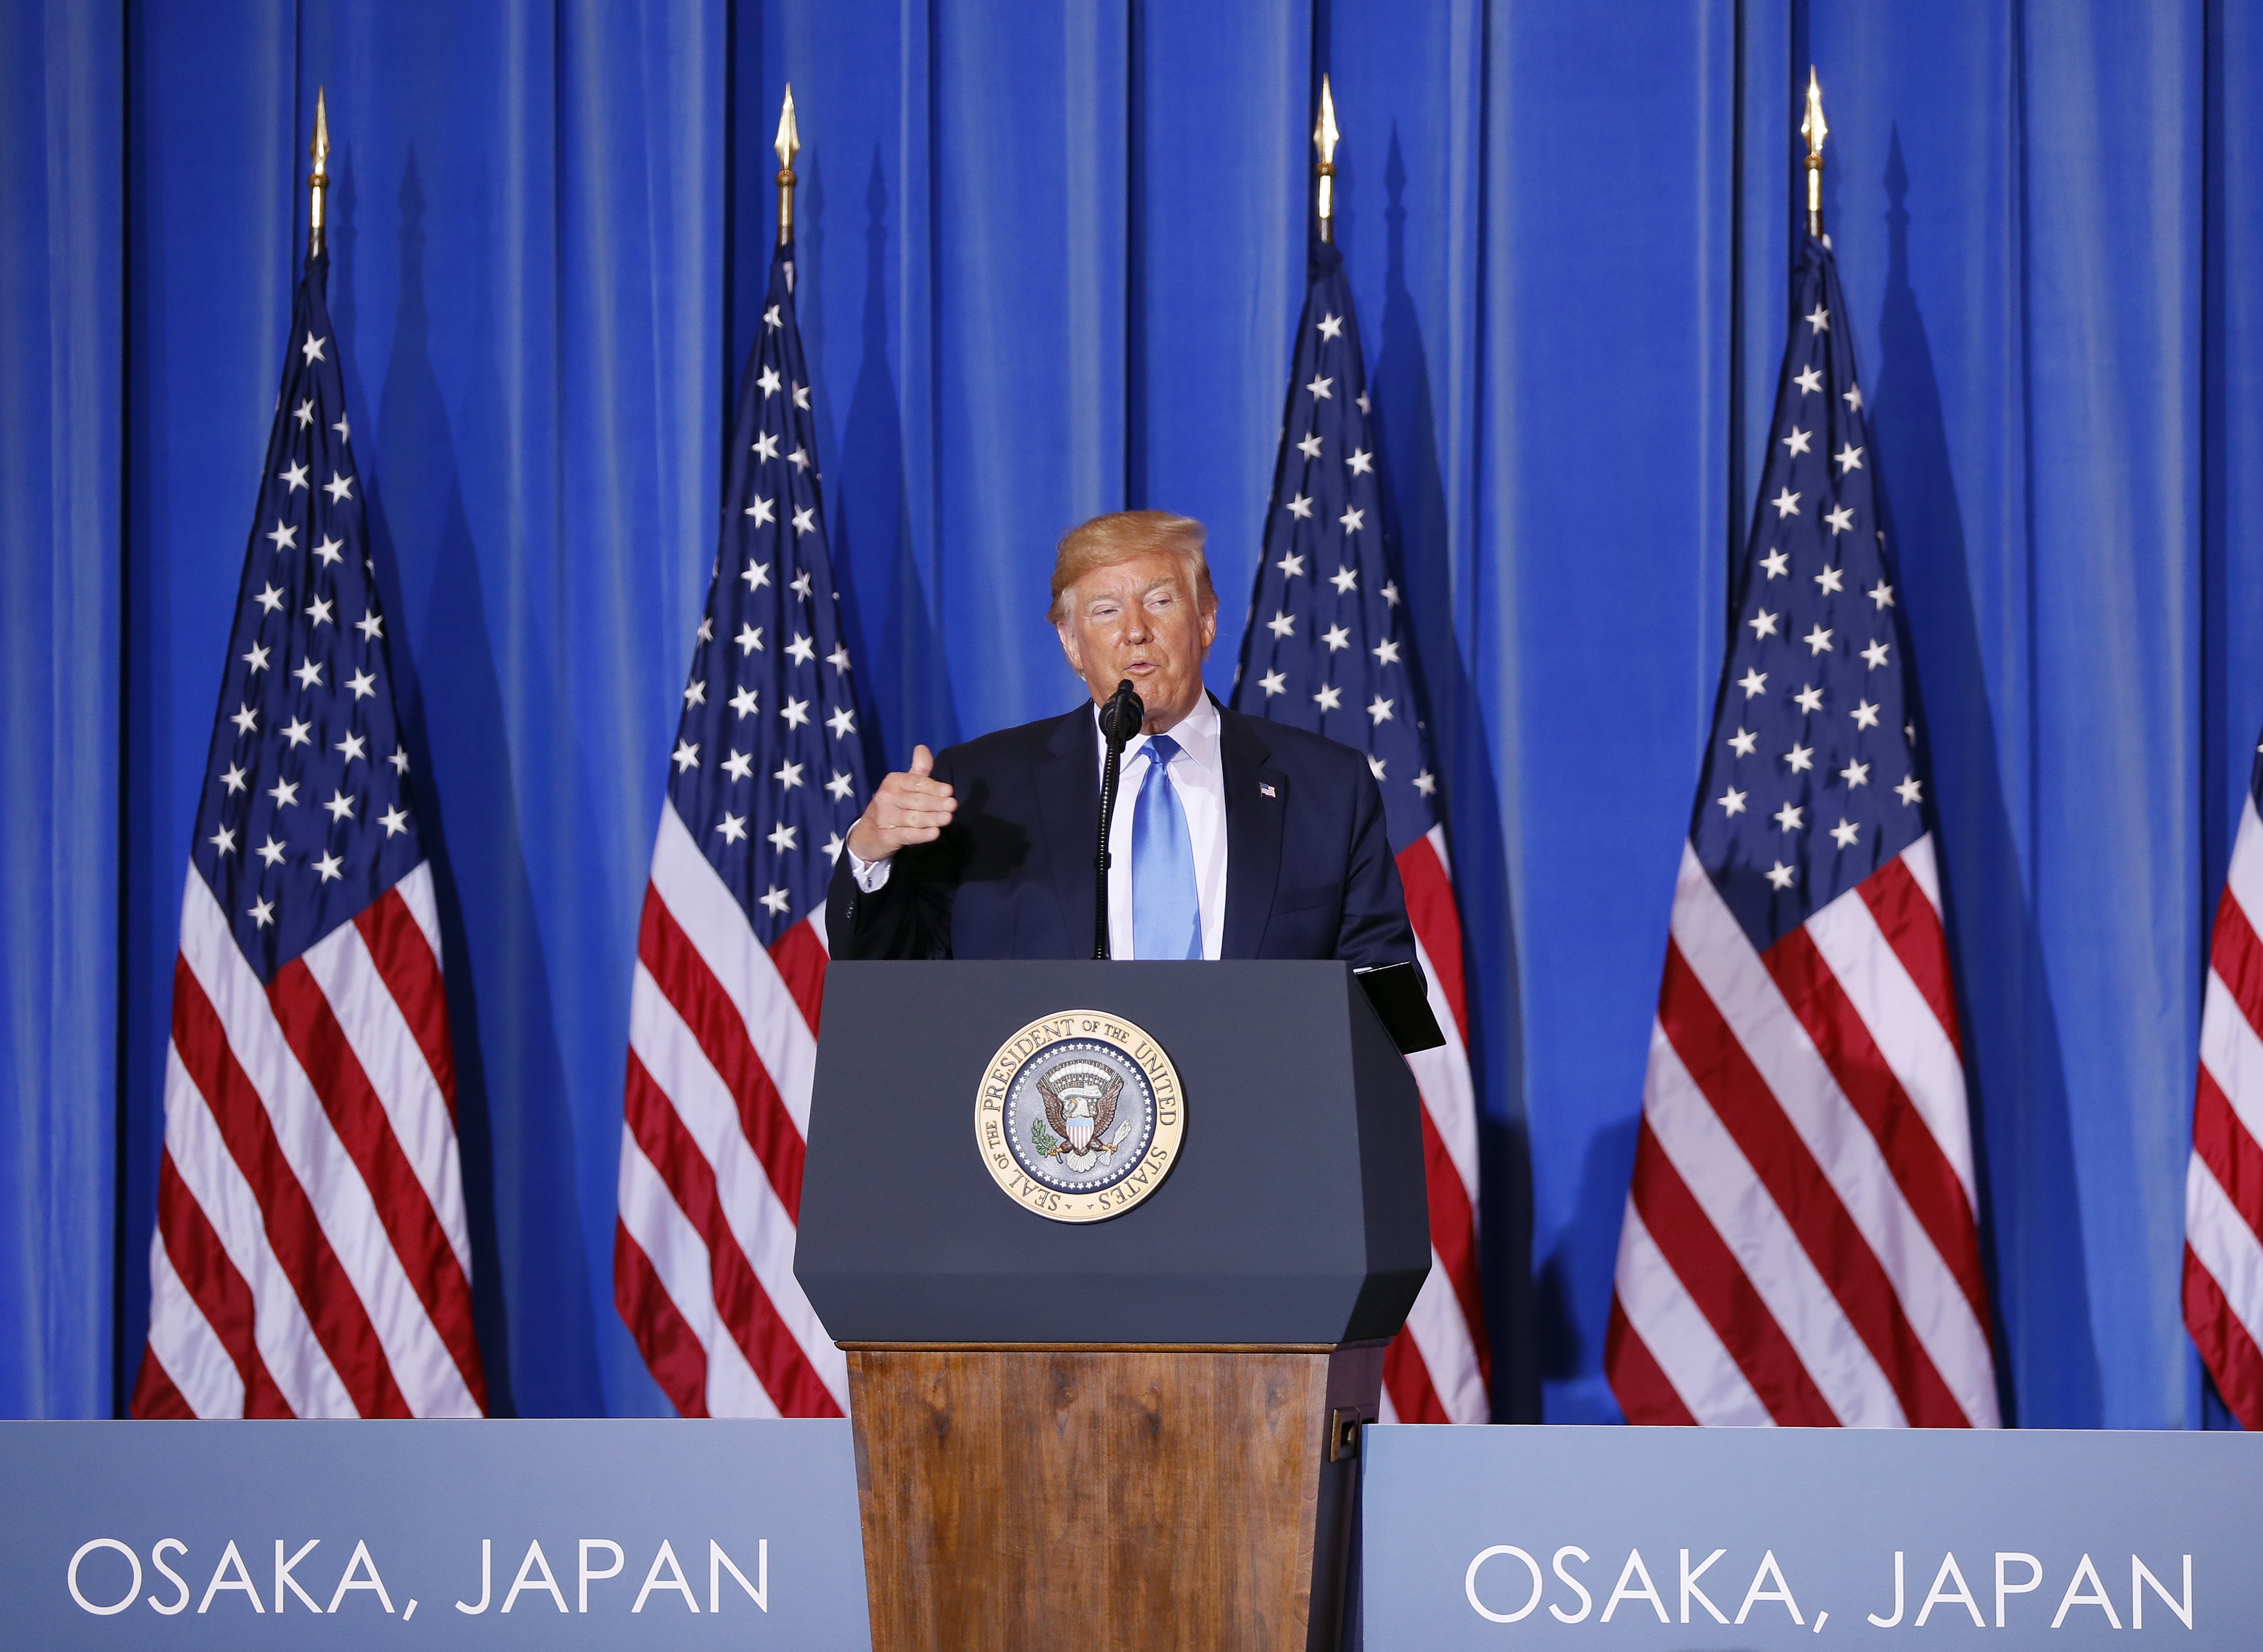 epa07681911 US President Donald J. Trump speaks during a news conference at a hotel in Osaka, western Japan, 29 June 2019 after closing the G20 Summit talks. It is the first time that Japan hosts a G20 summit. The summit gathers leaders from 19 countries and the European Union to discuss topics such as global economy, trade and investment, innovation and employment  EPA/KIMIMASA MAYAMA